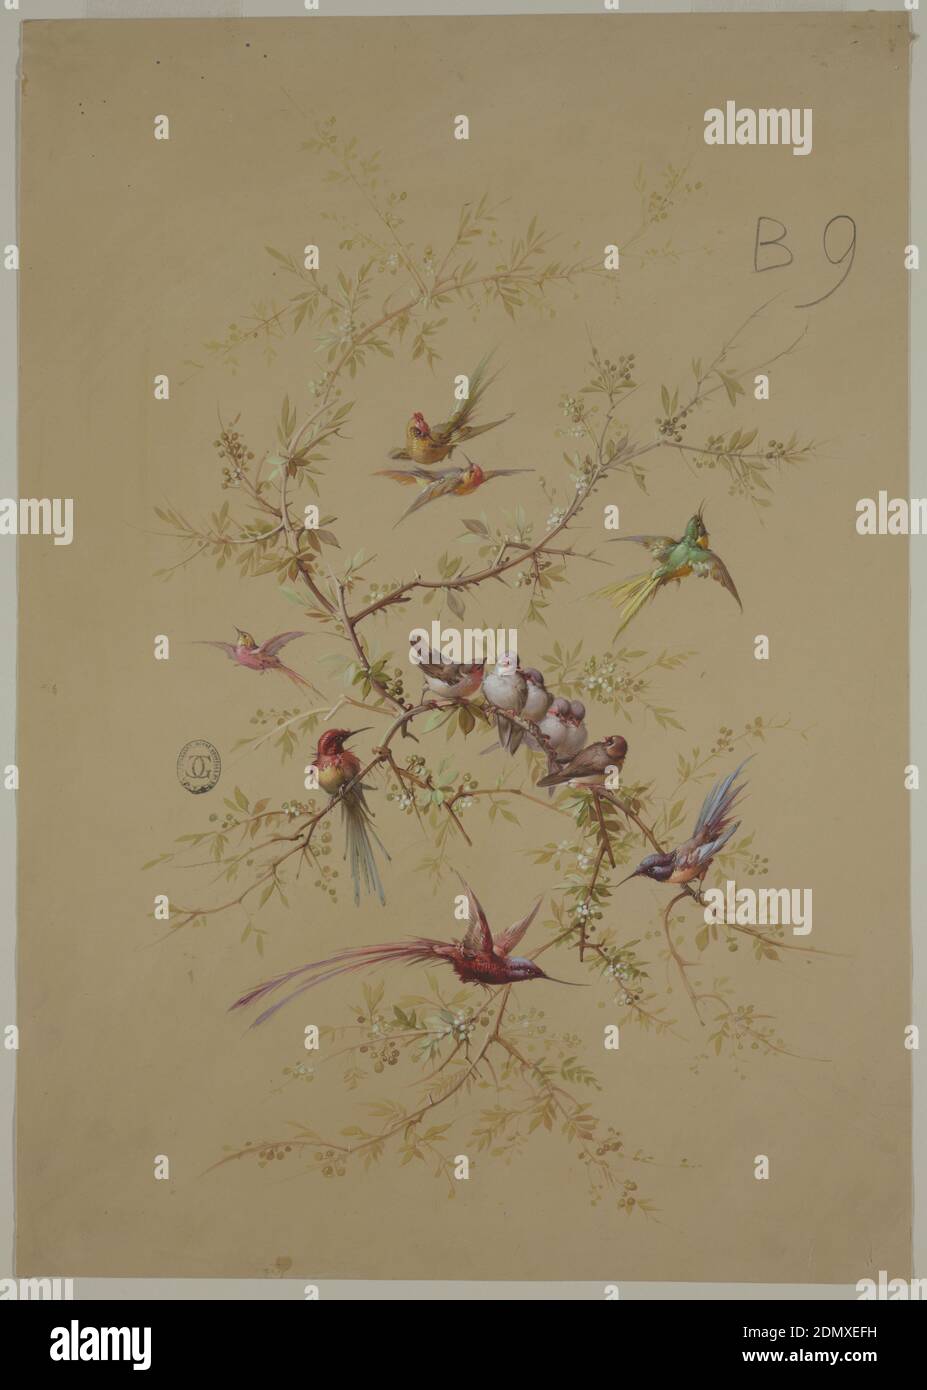 Design for Wallpaper and Textile: Flowers and Birds, Brush and gouache on cream paper, Branches with foliage, berries and birds perched and flying around them. Composition organized in a vertical oval shape., France, 19th century, wallpaper designs, Drawing Stock Photo